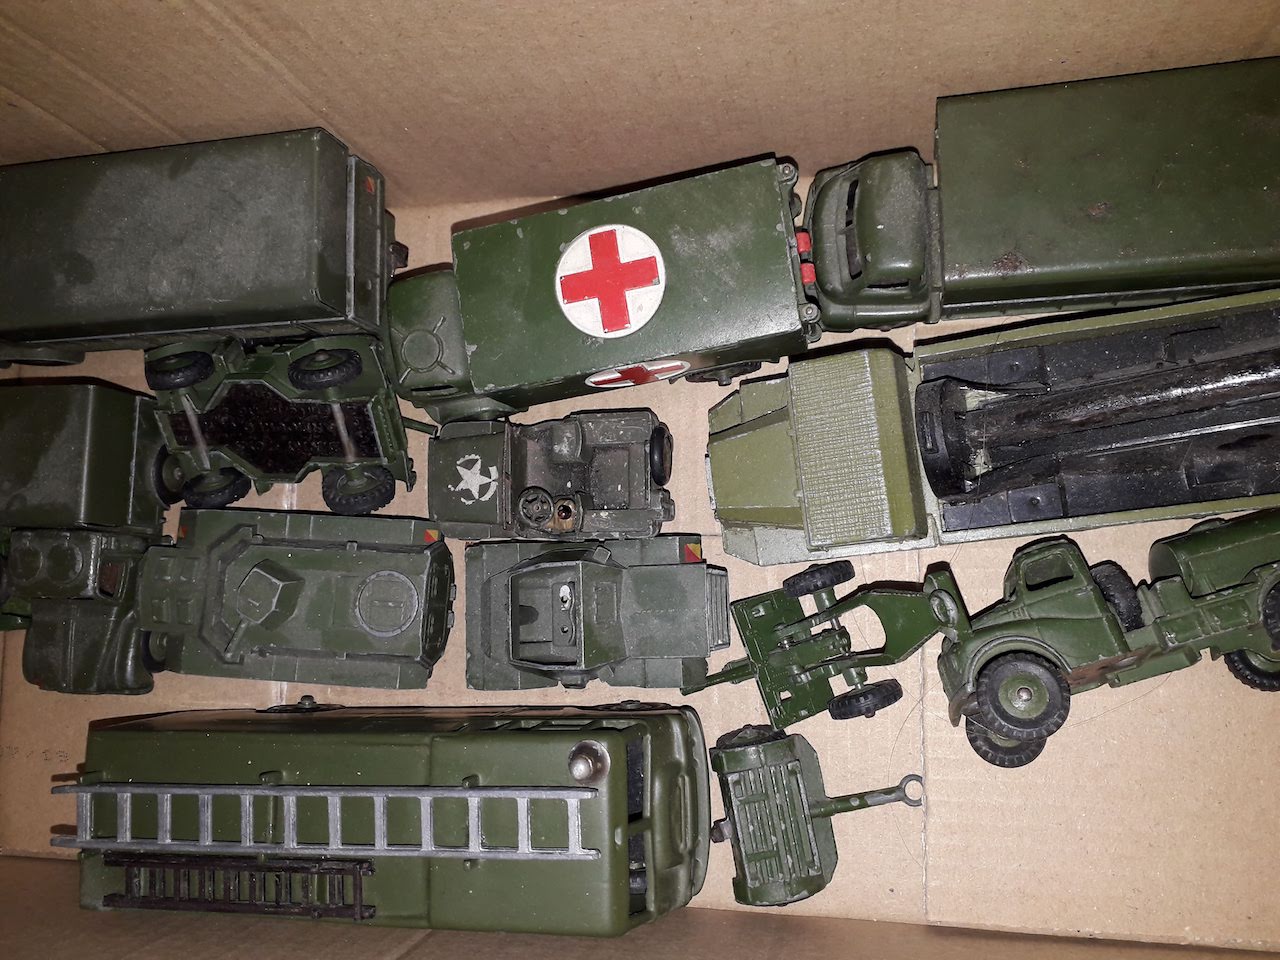 A box of Dinky military model vehicles.